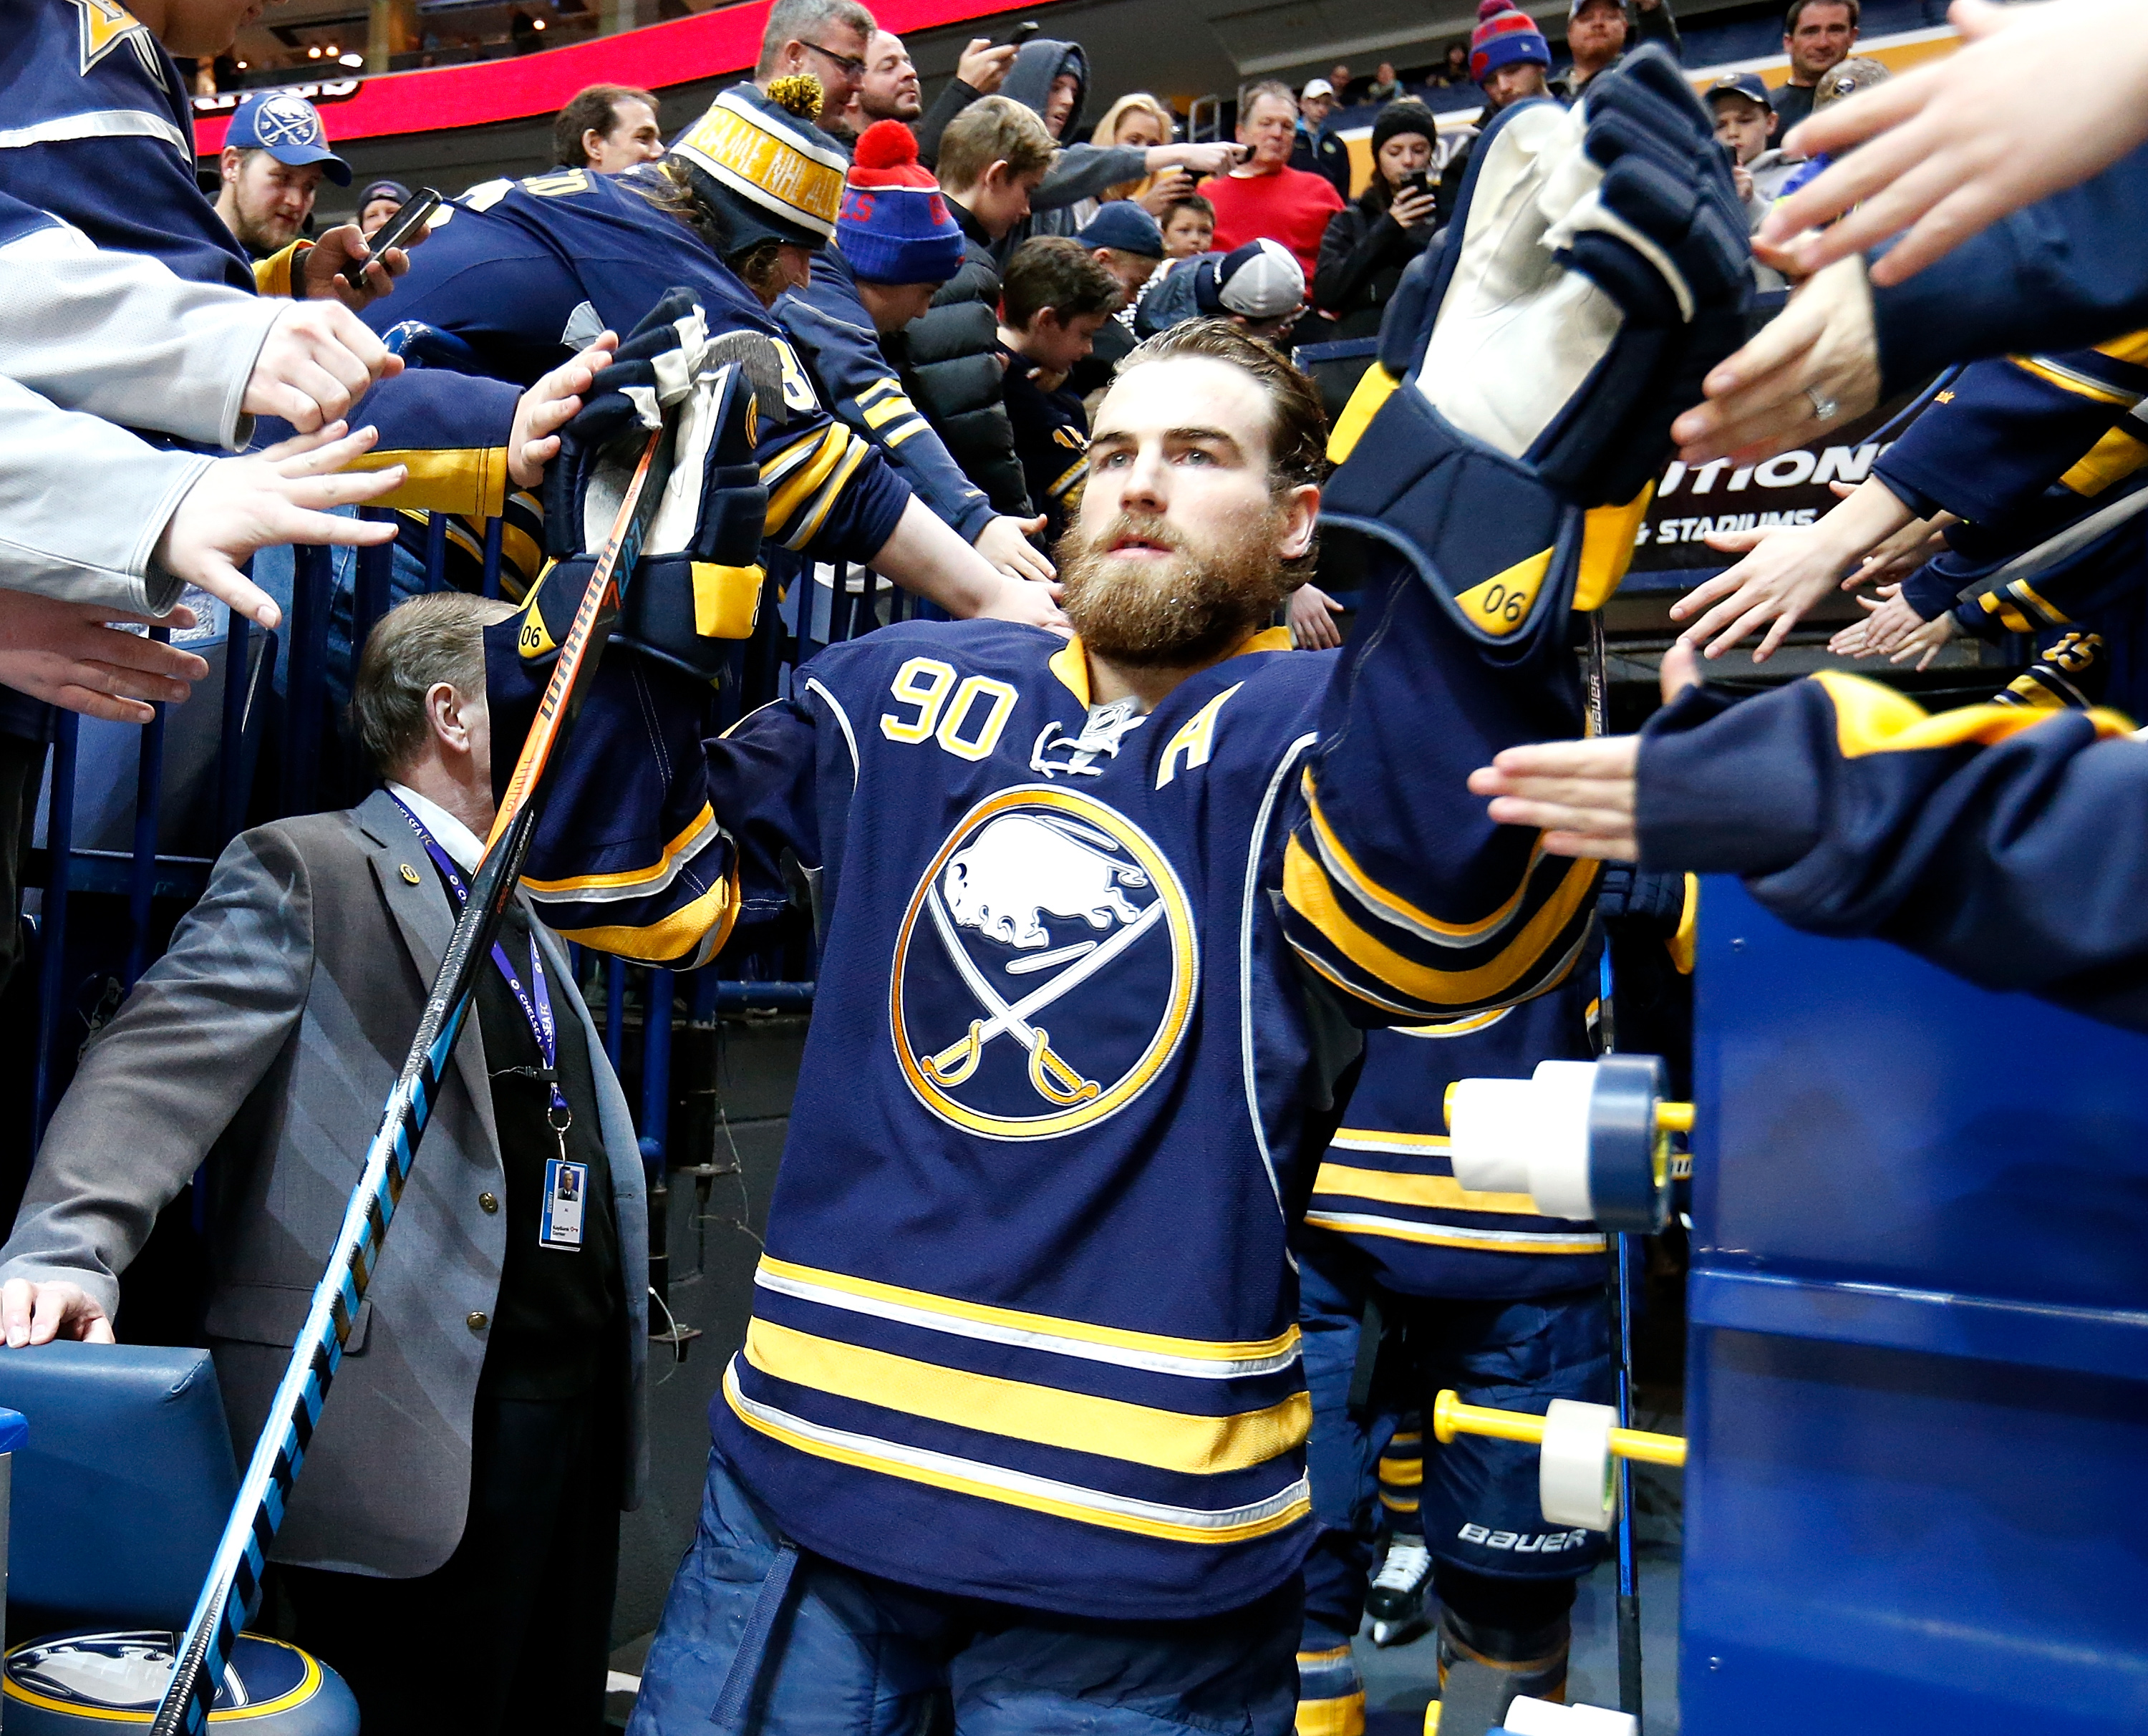 Buffalo Sabres: Don't rely too much on Jason Pominville